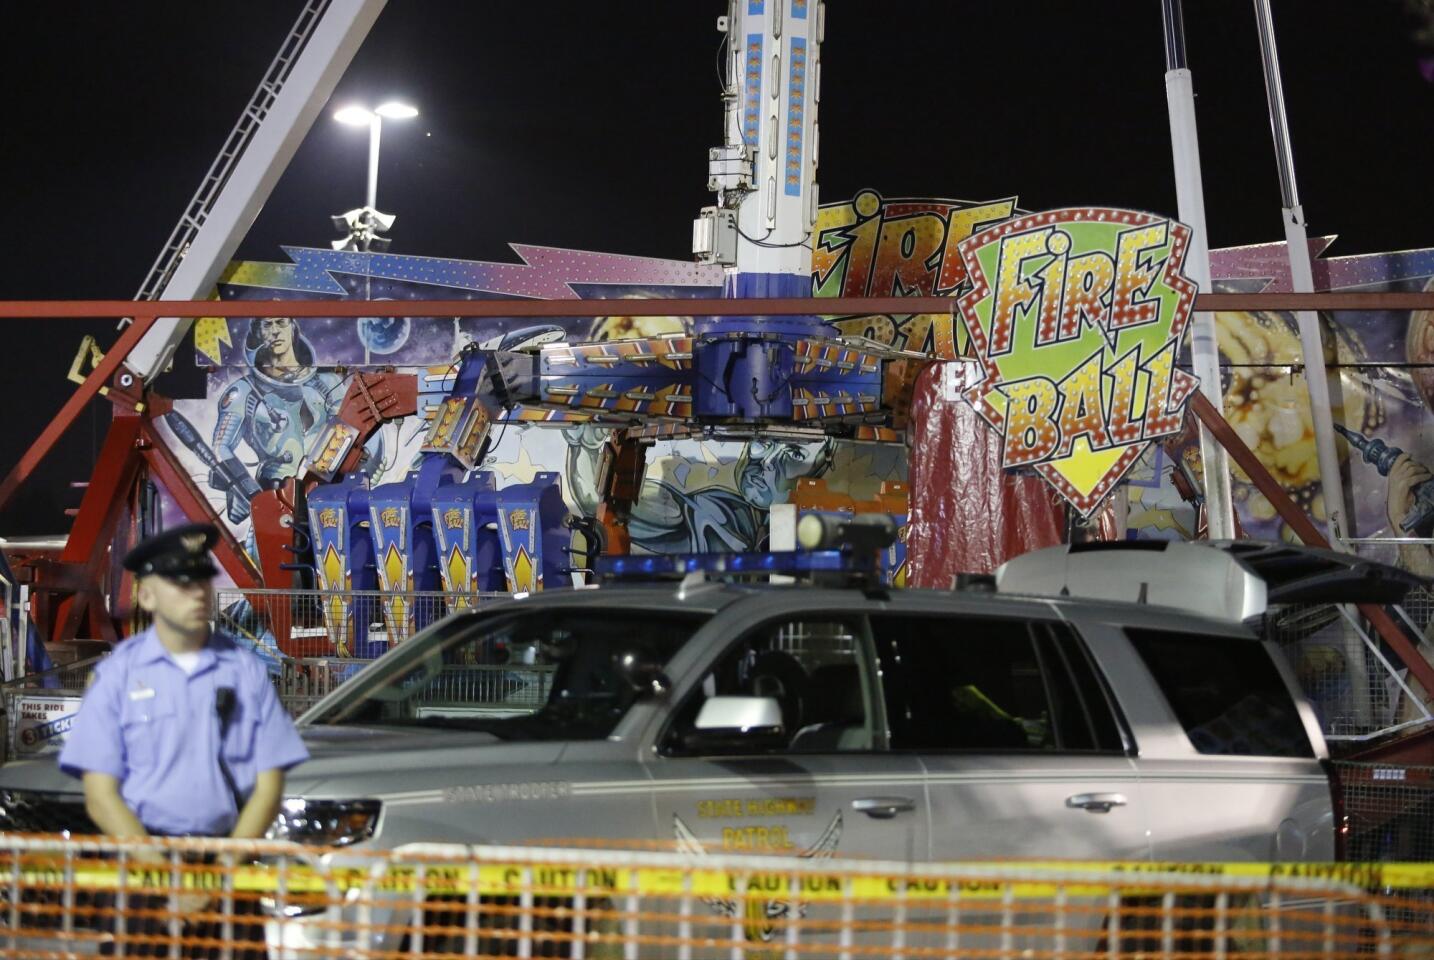 Authorities stand near the Fire Ball amusement ride after the ride malfunctioned injuring several at the Ohio State Fair, Wednesday, July 26, 2017, in Columbus, Ohio. Some of the victims were thrown from the ride when it malfunctioned Wednesday night, said Columbus Fire Battalion Chief Steve Martin.